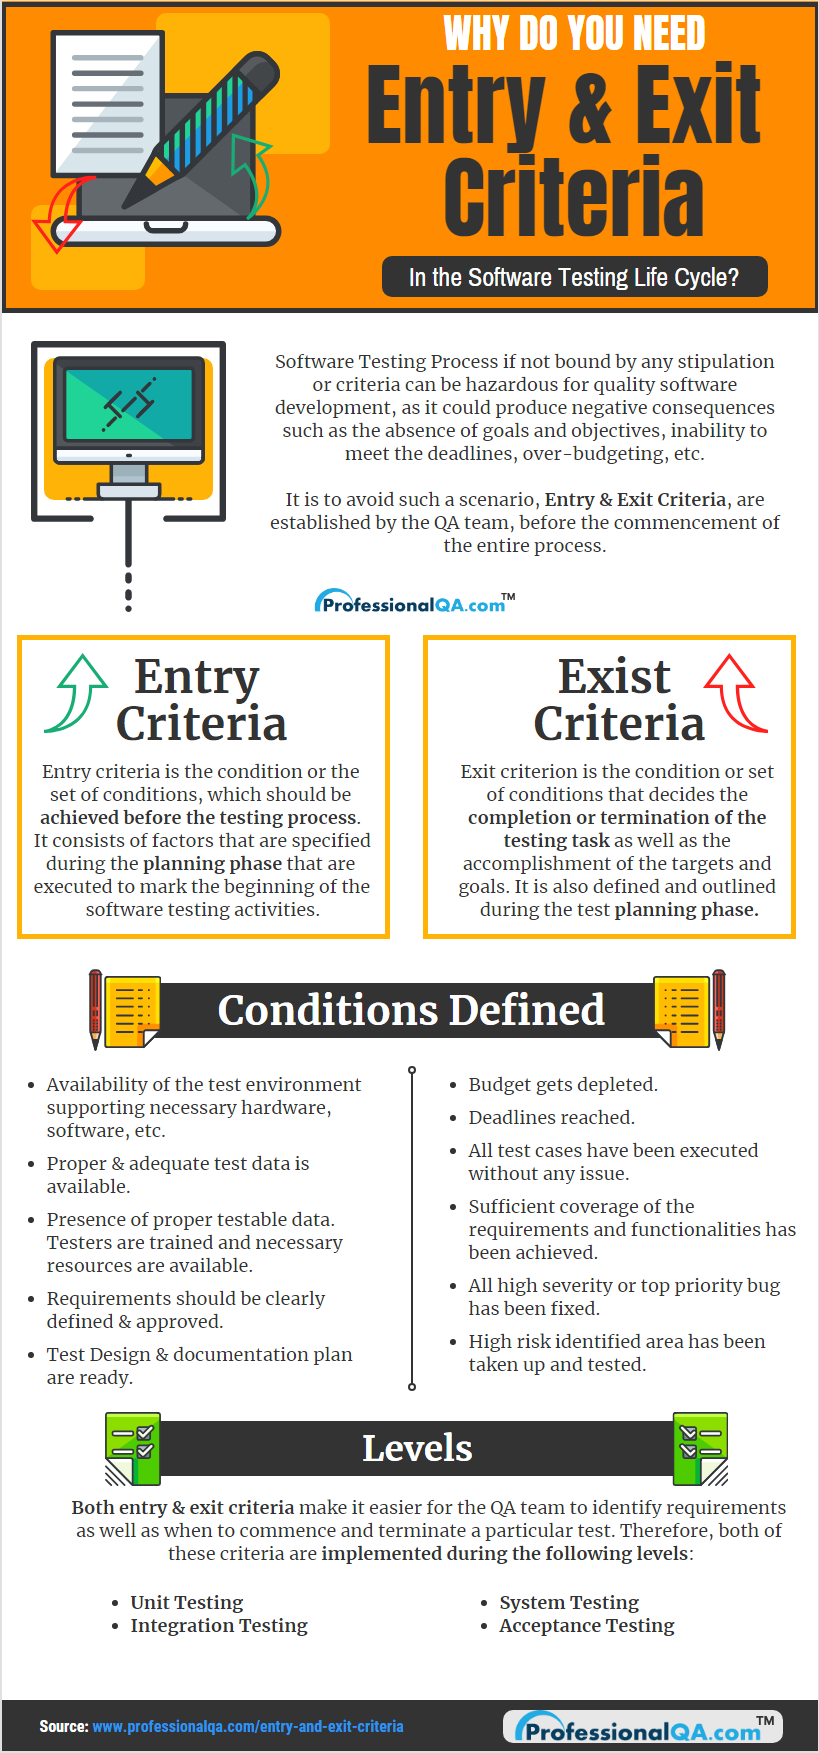 Entry and Exit Criteria info-graphics